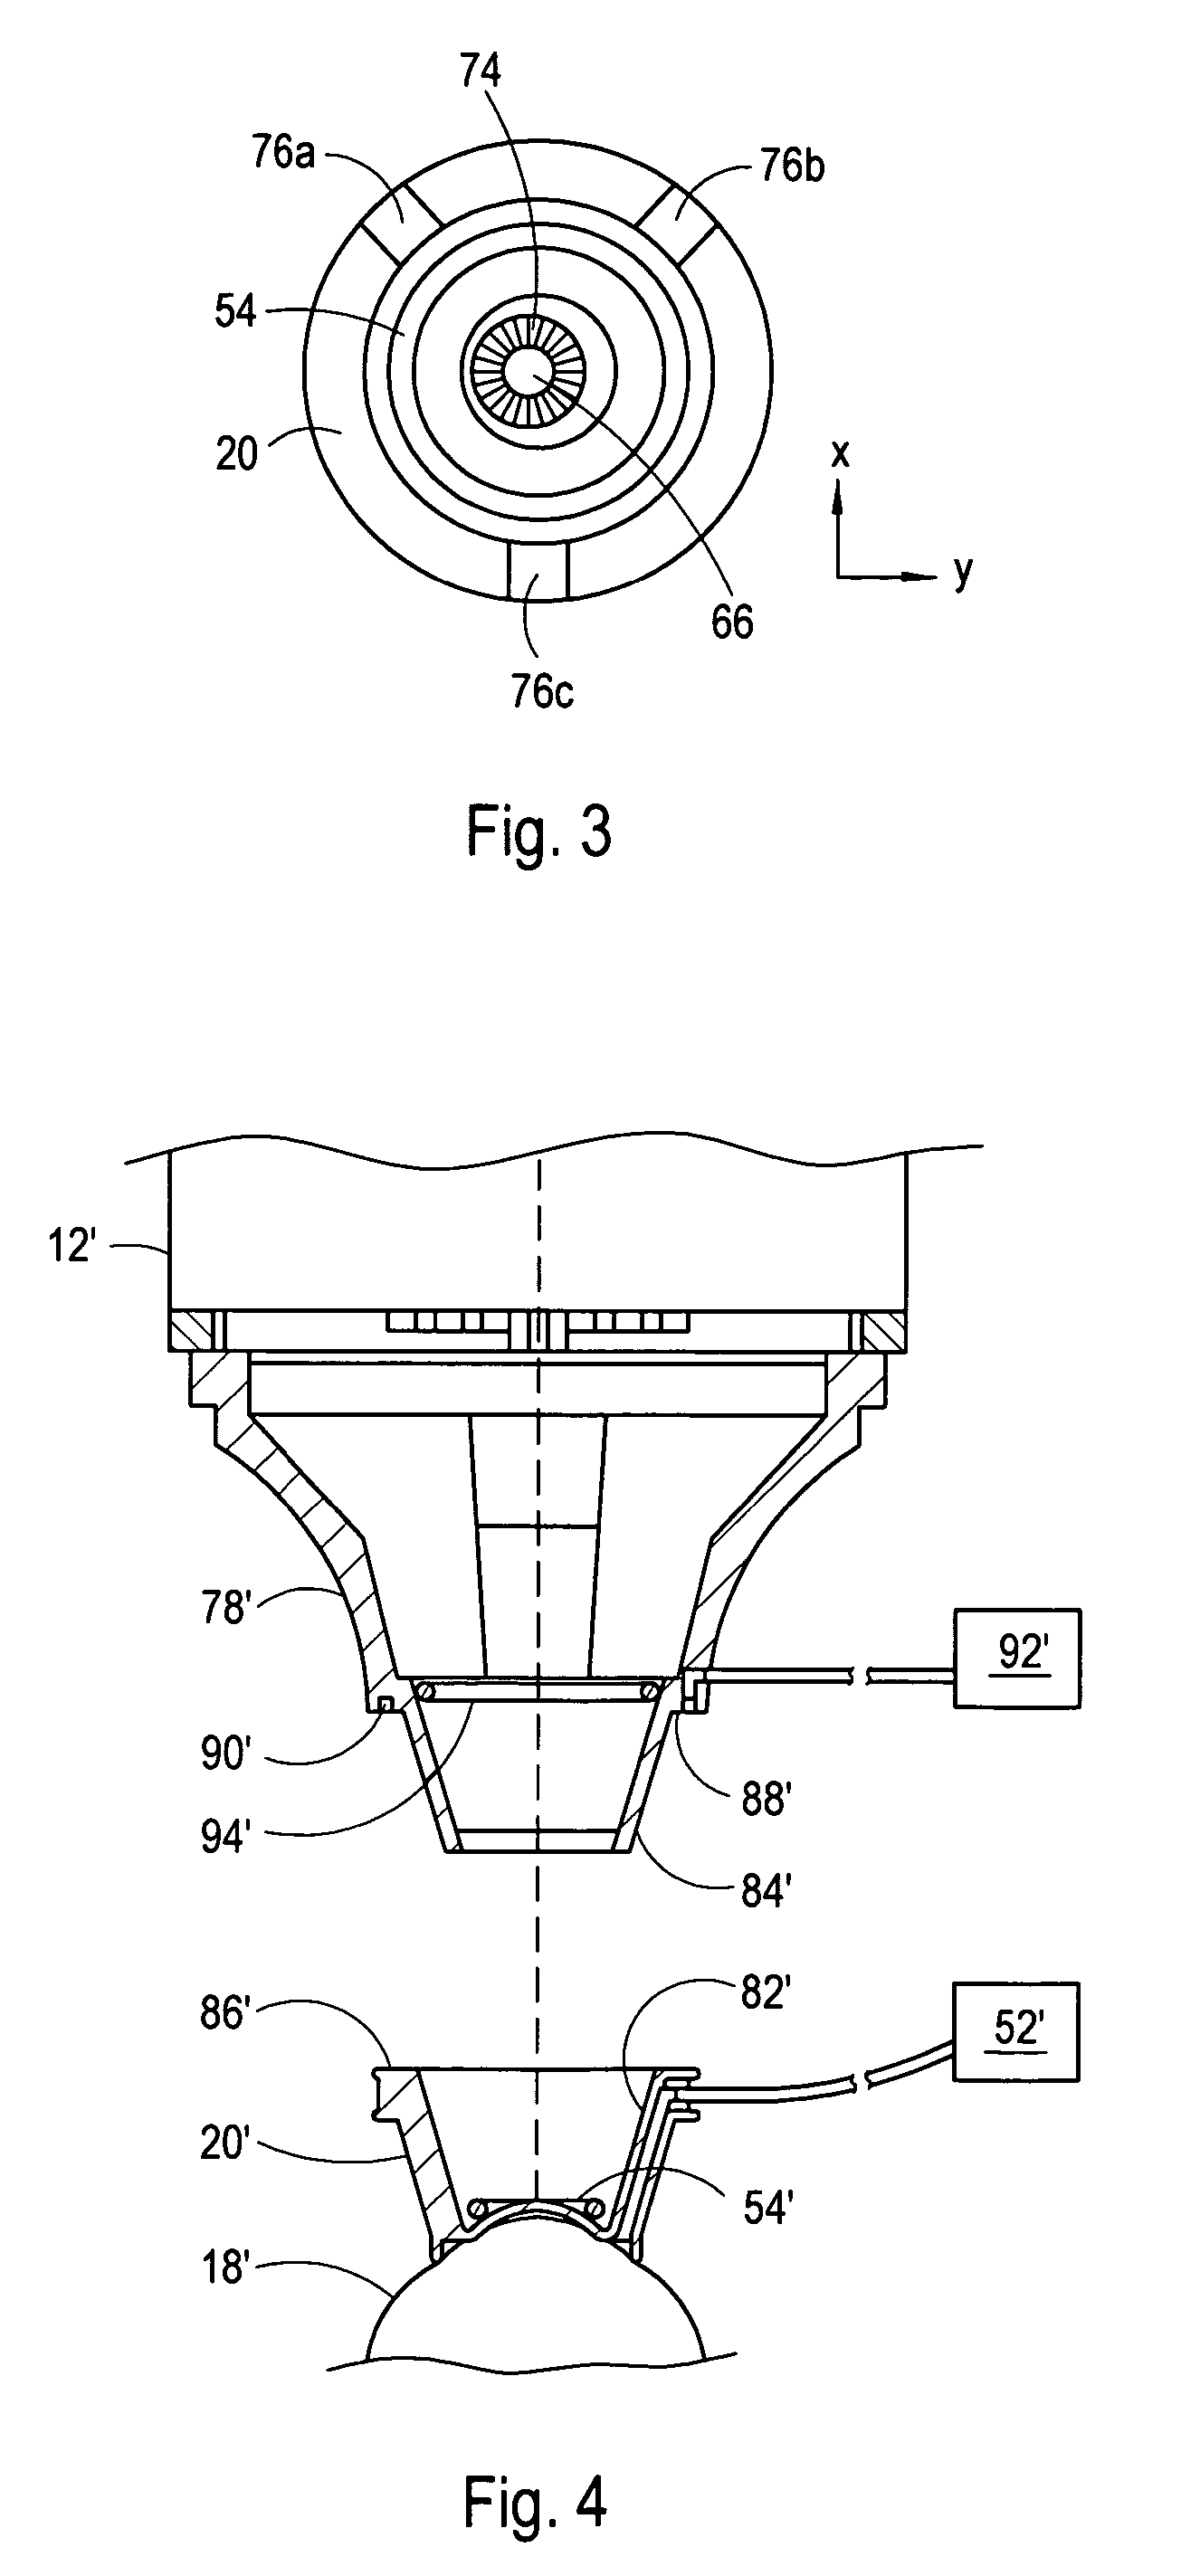 Device and method for aligning an eye with a surgical laser